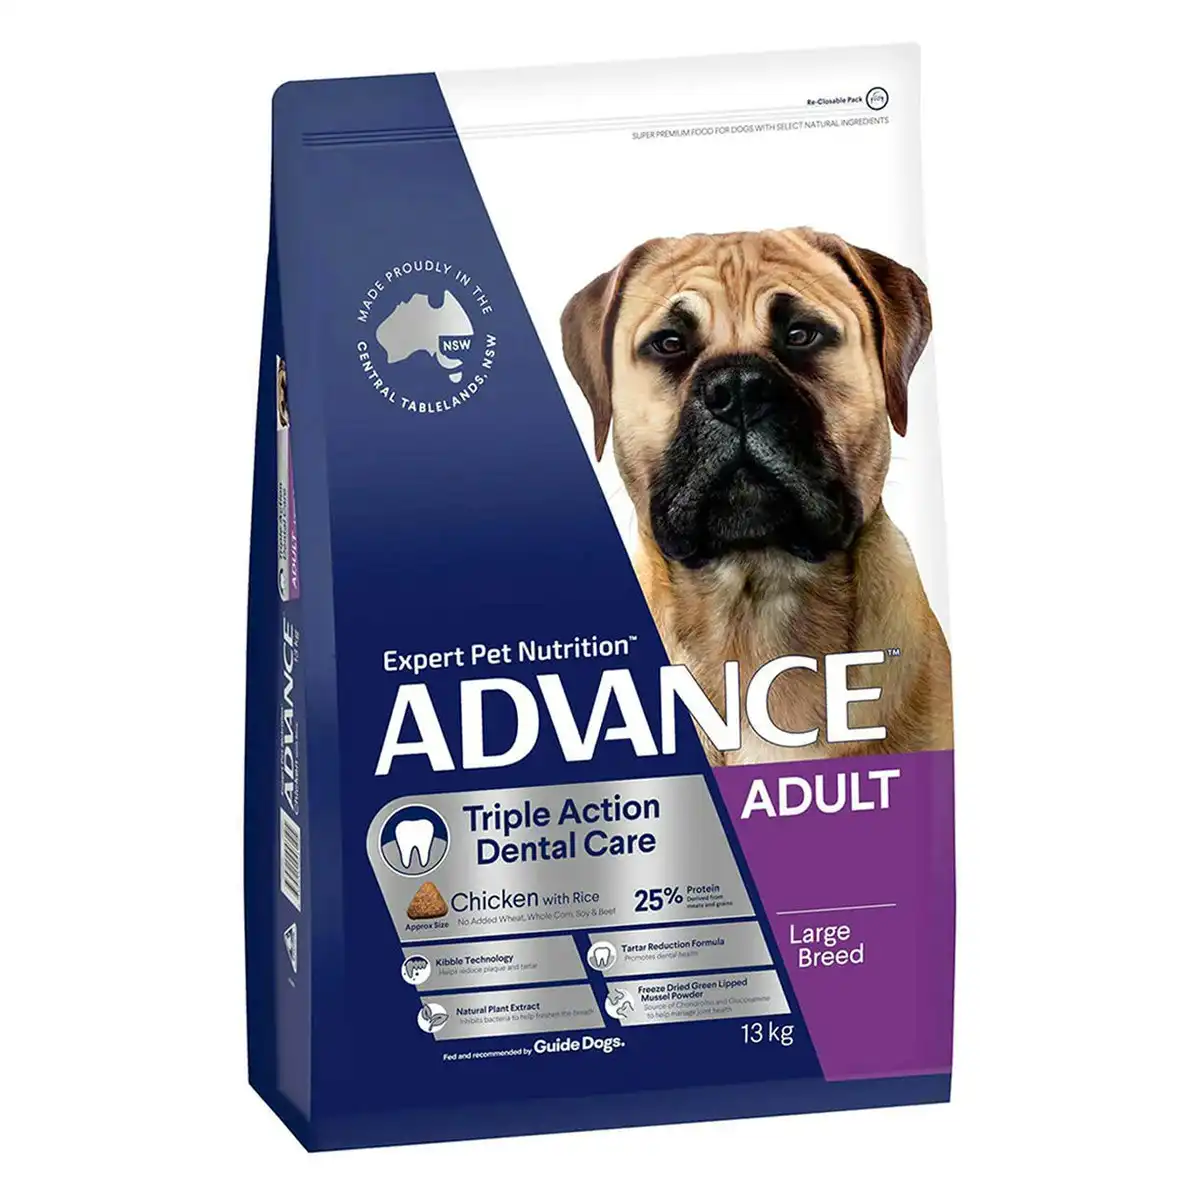 ADVANCE Dental Care Triple Action Adult Large Breed Chicken with Rice Dry Dog Food 13 Kg